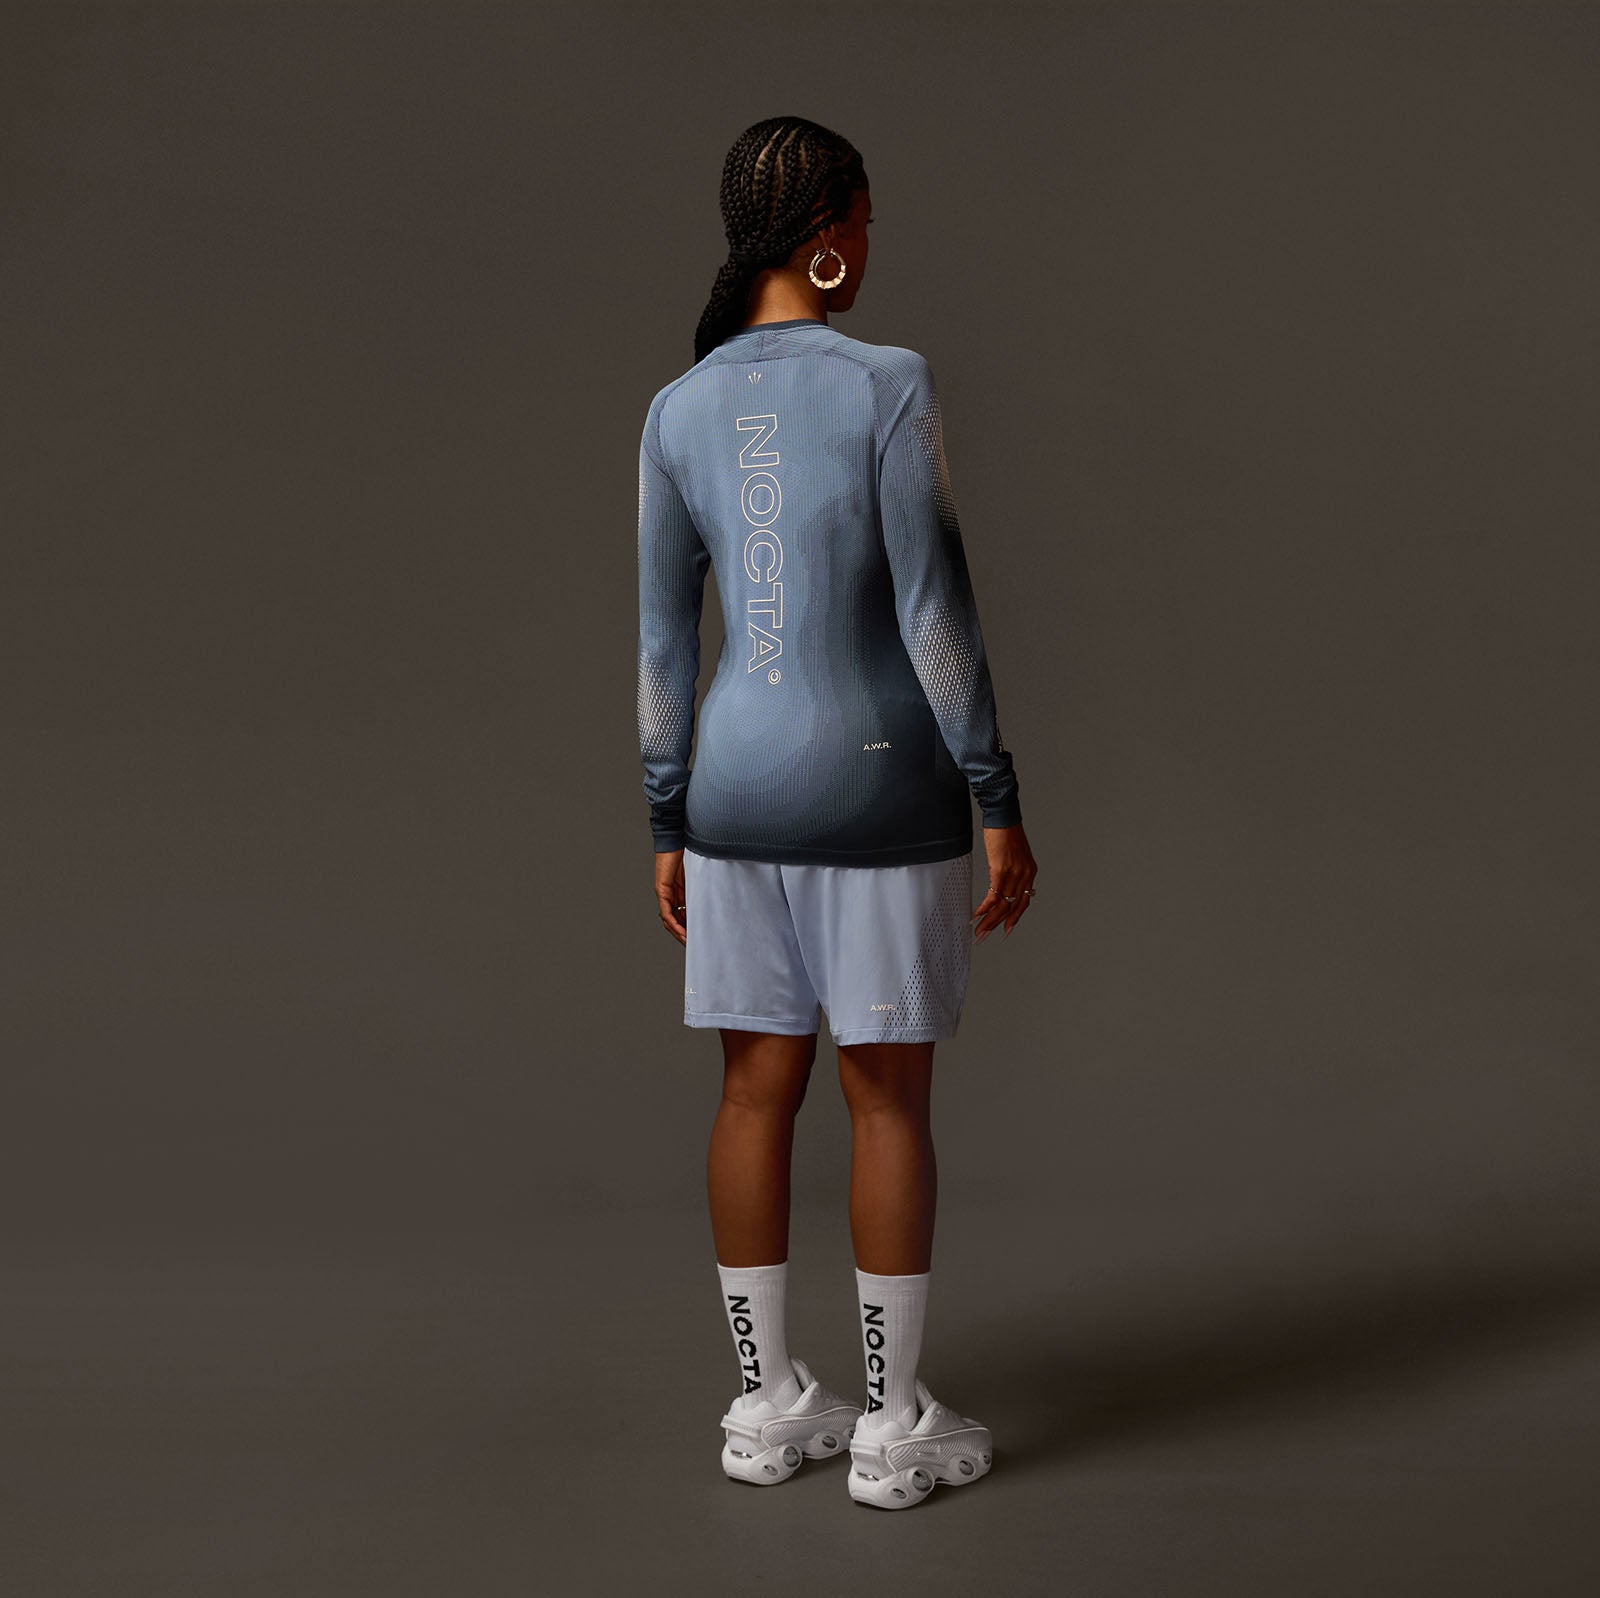 LS ENGINEERED KNIT BASE LAYER TOP - IMAGE 5